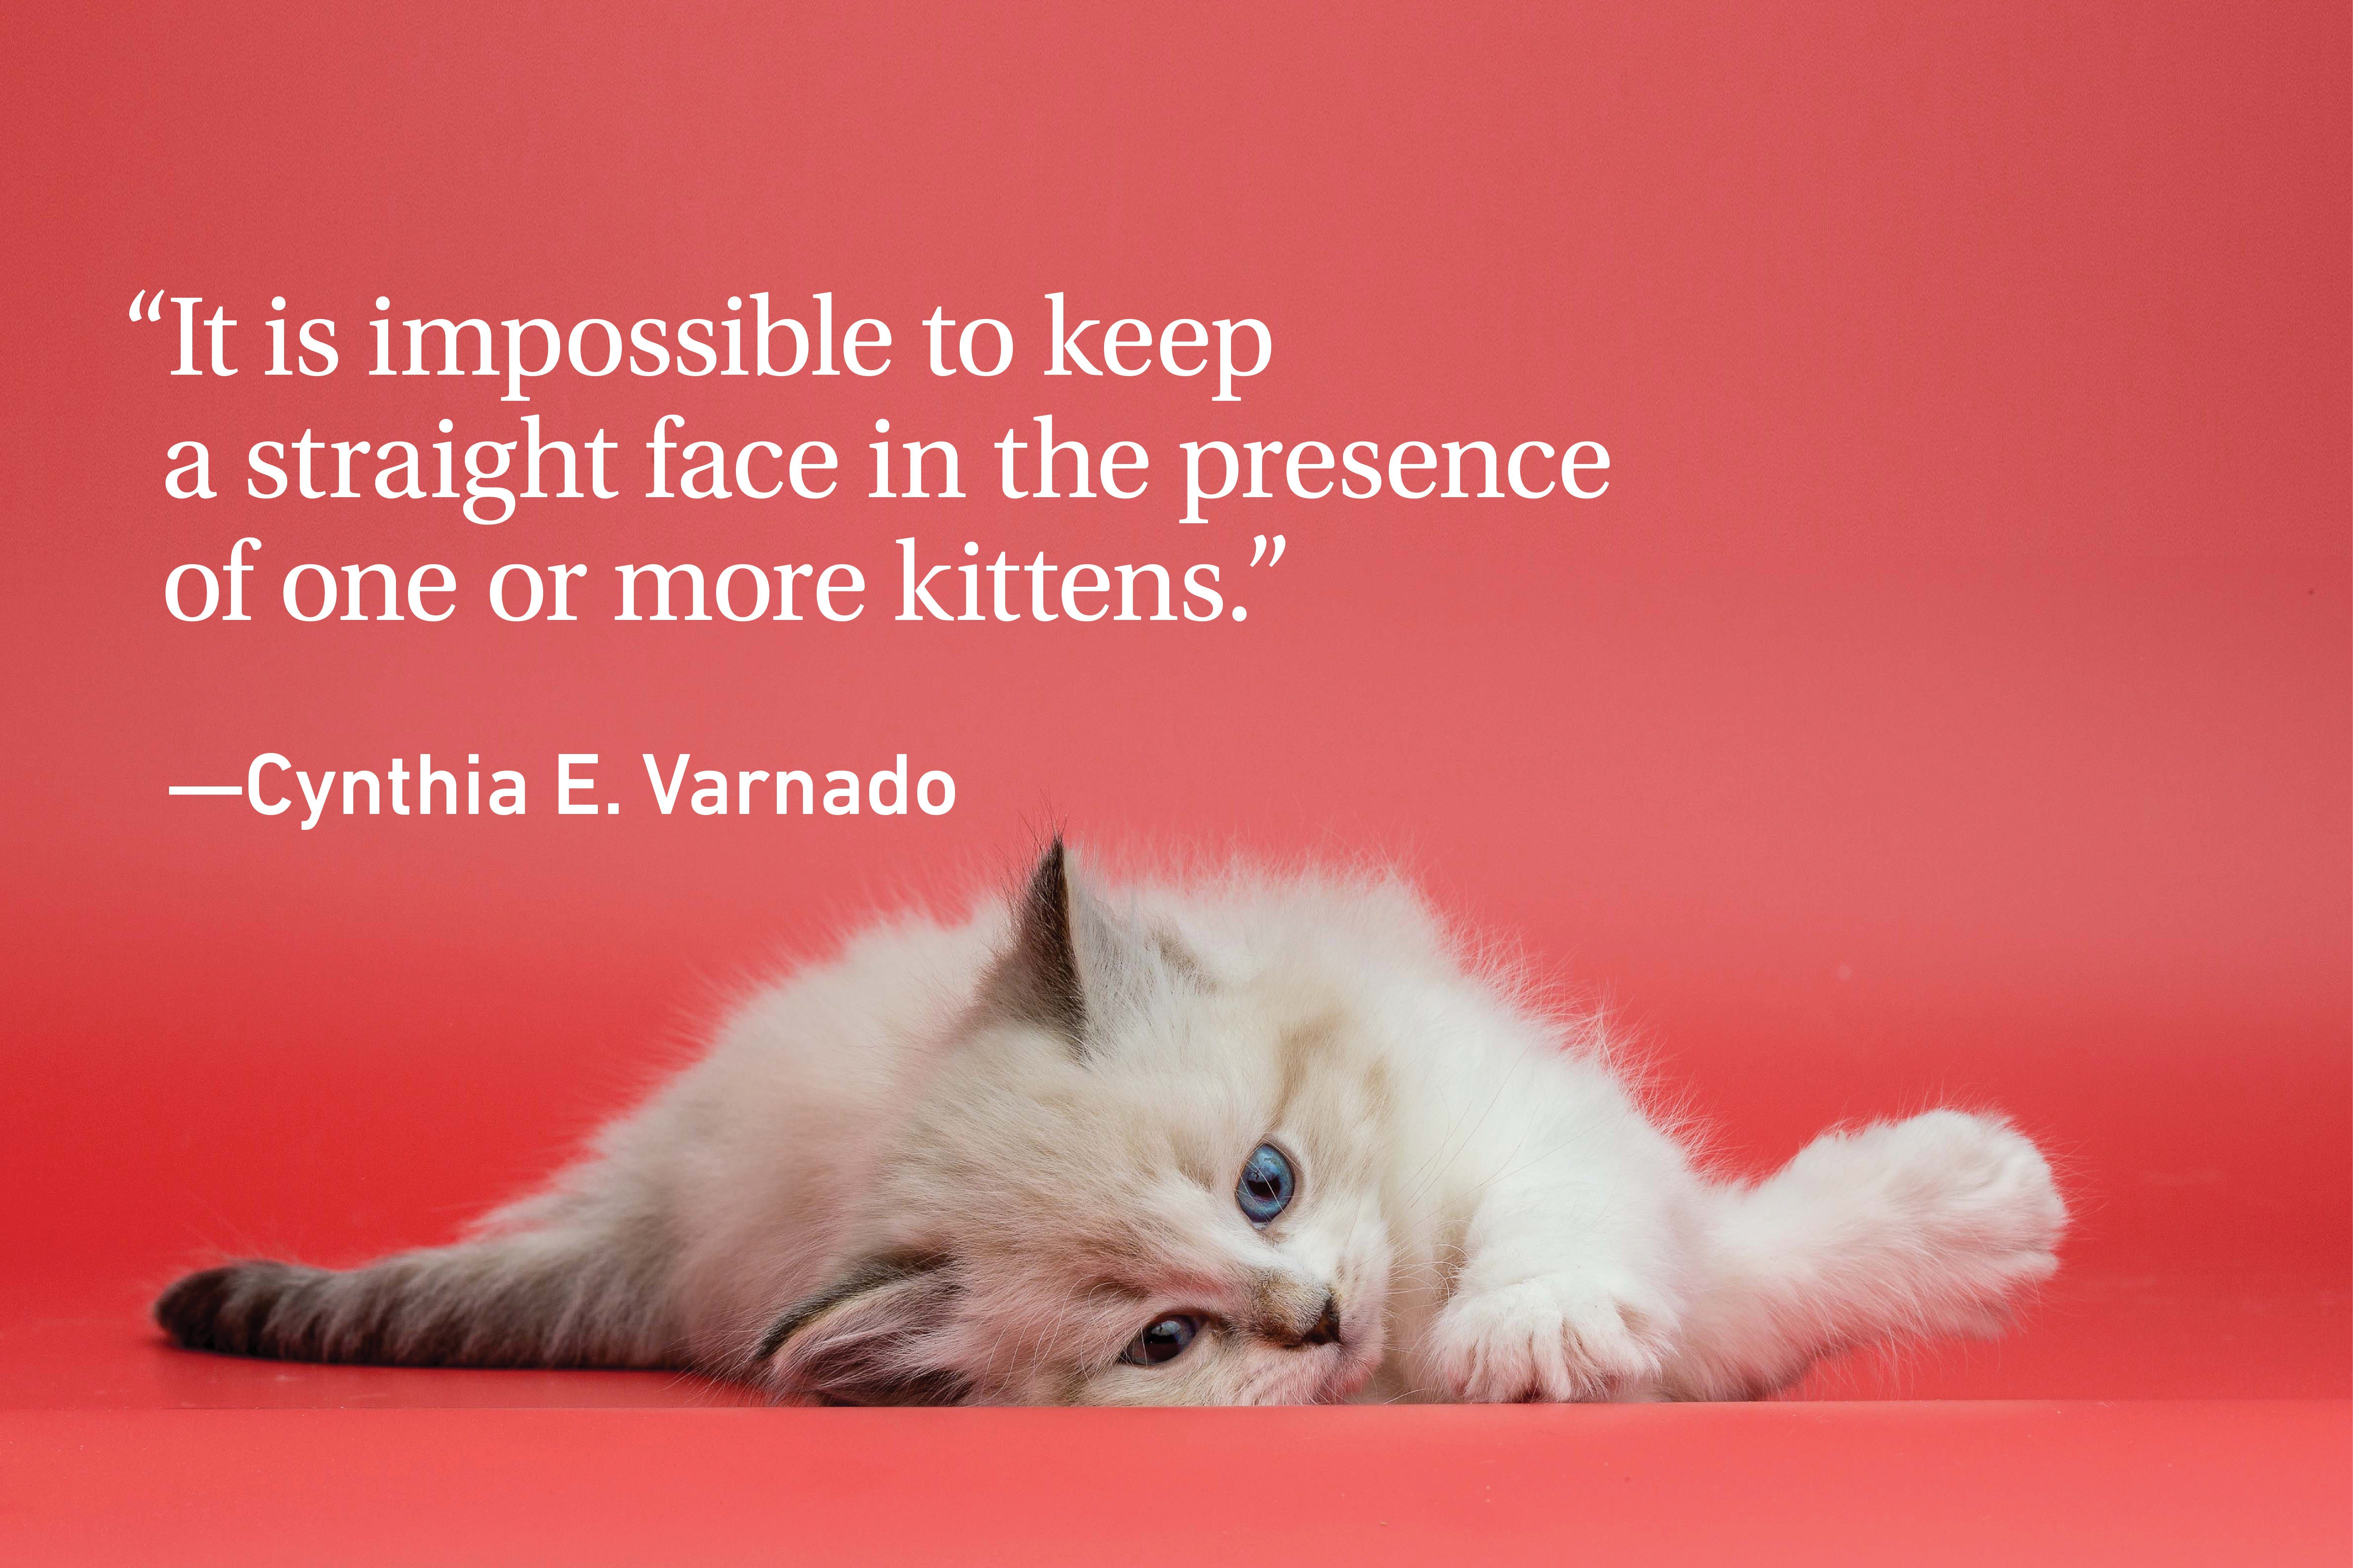 Kitten on a red background with a cat quote